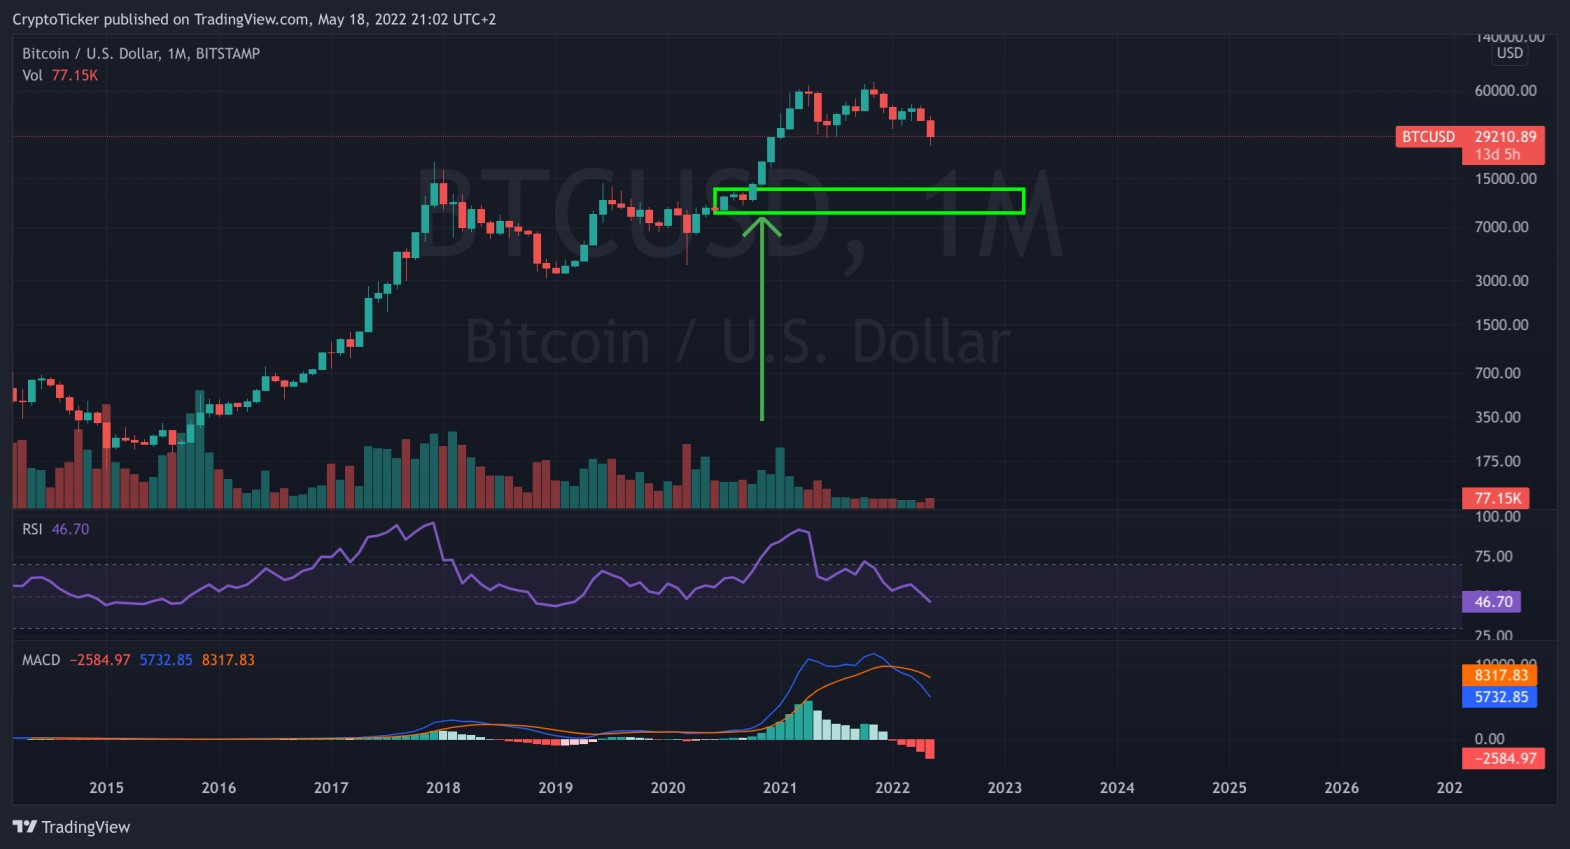 BTC/USD 1-month chart showing the support area of BTC